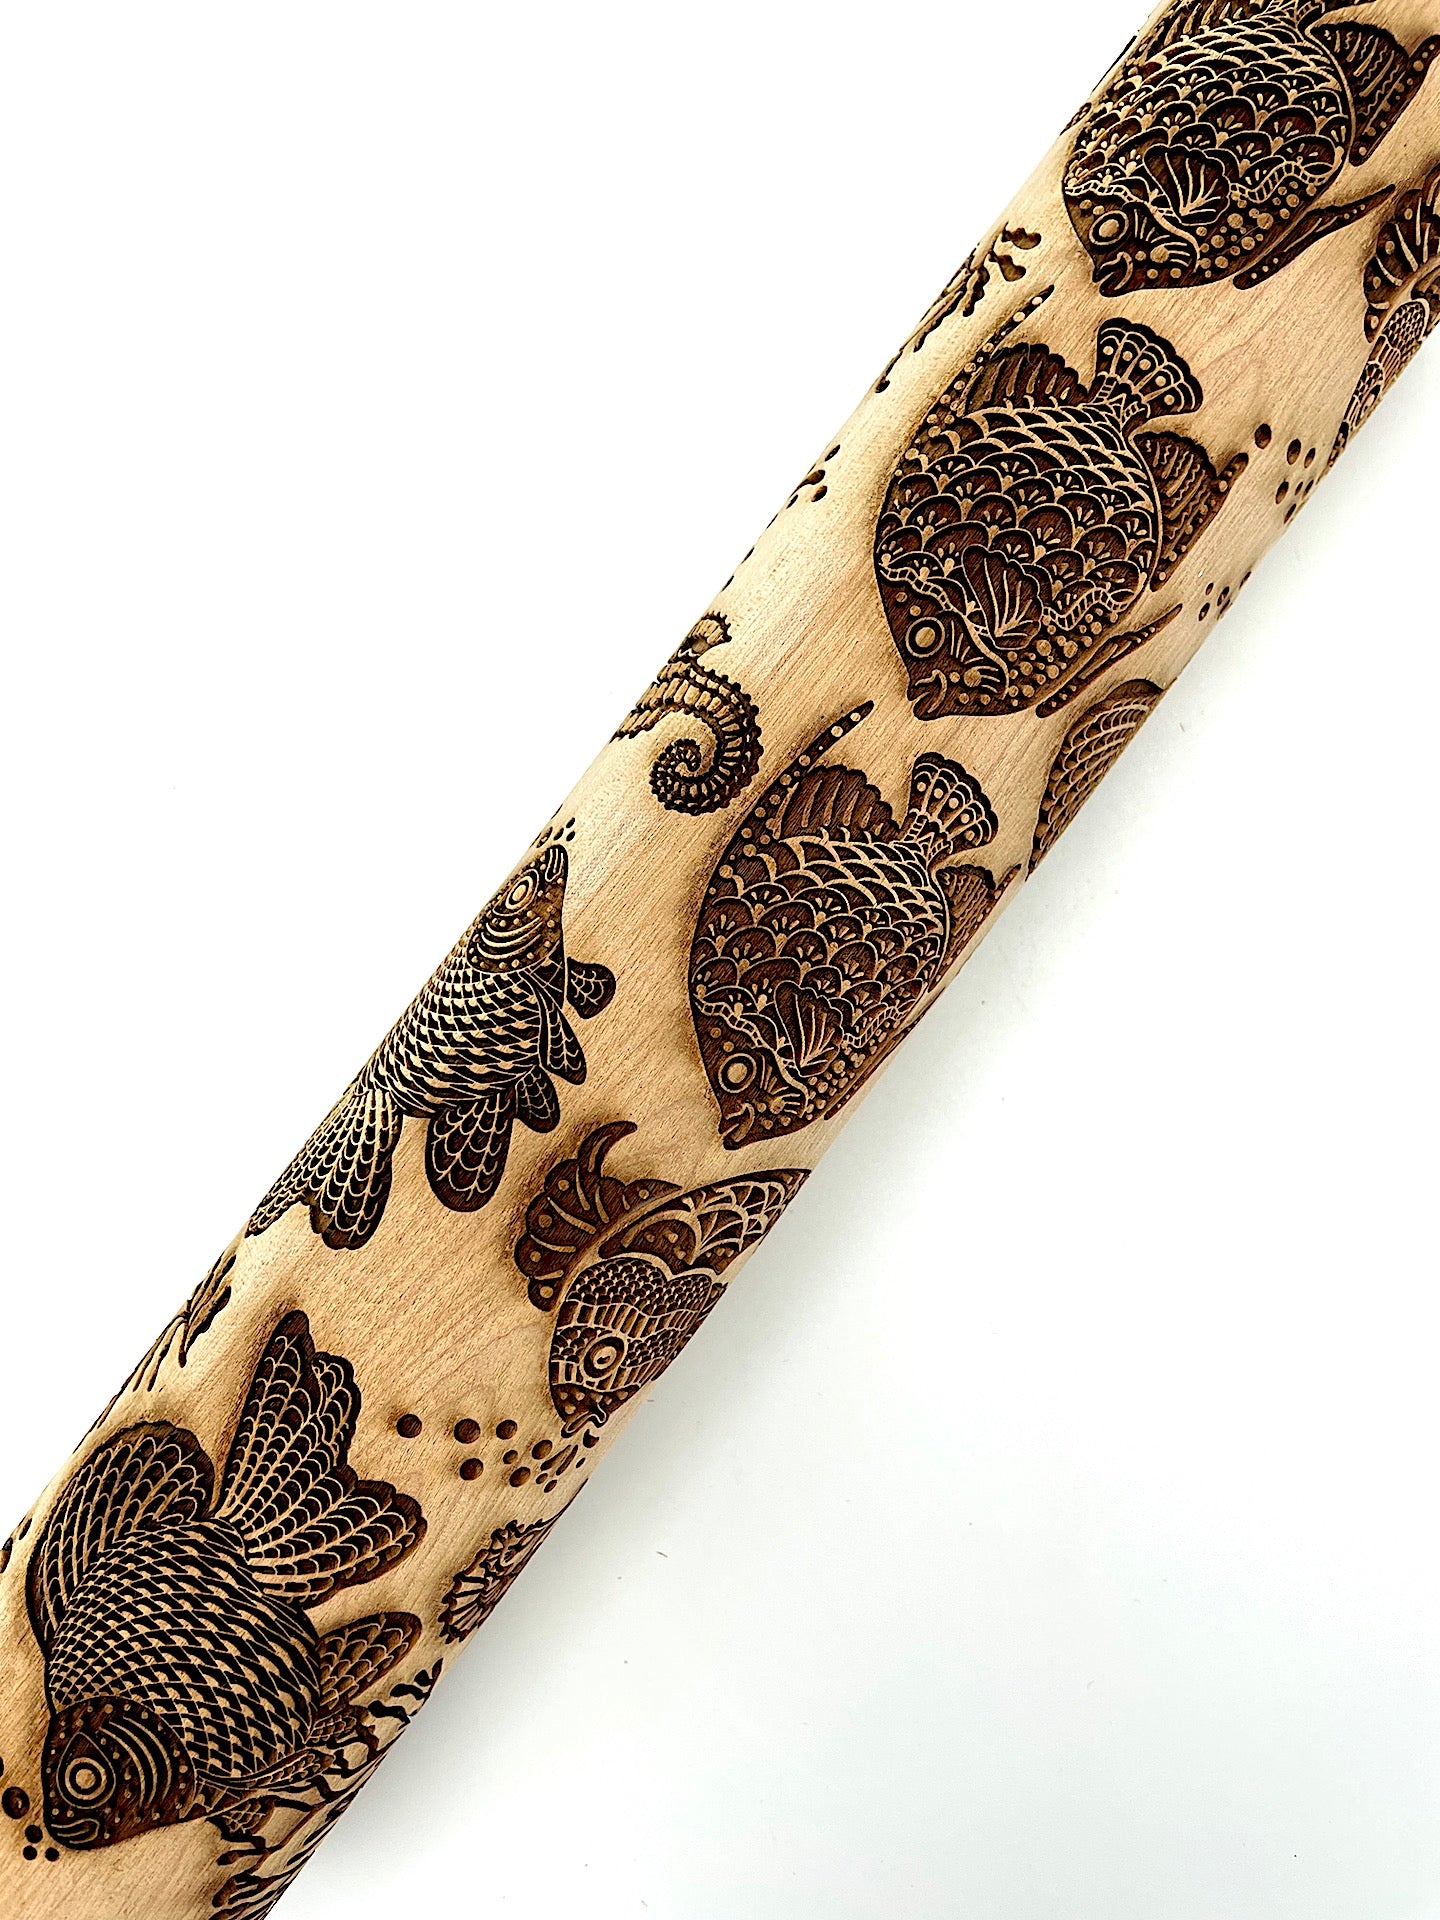 Under The Sea Textured Rolling Pin